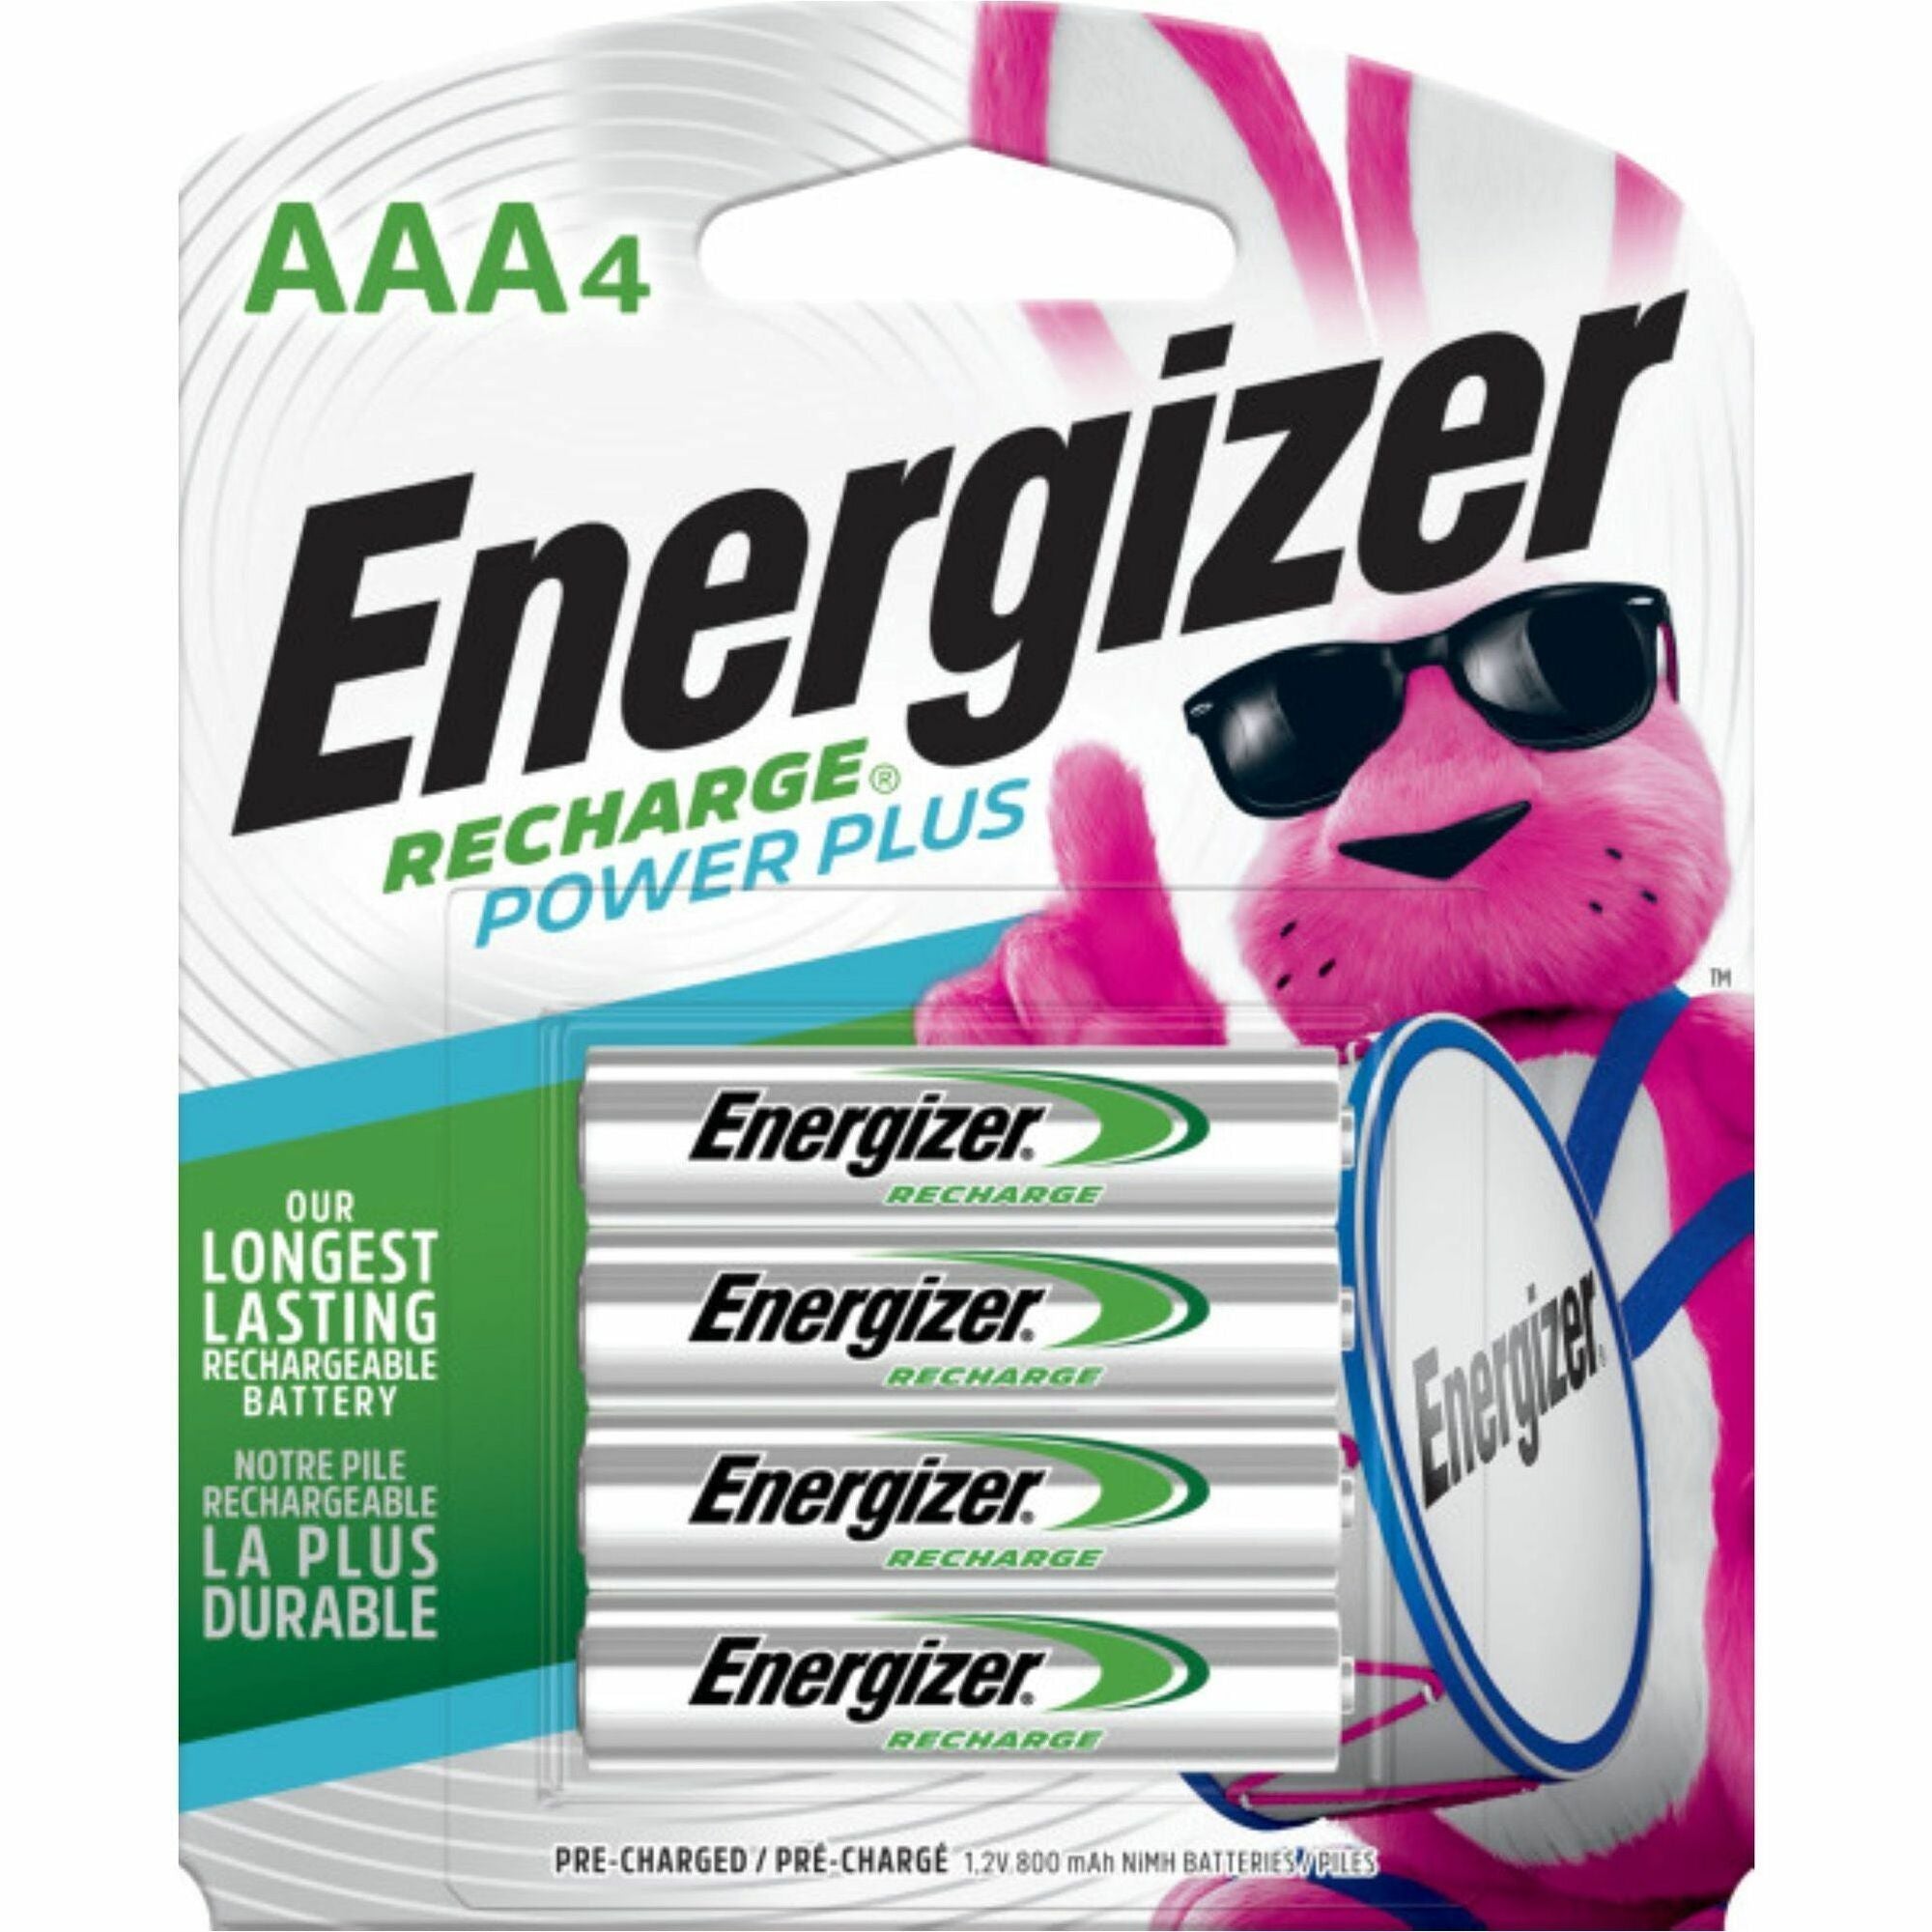 energizer-recharge-power-plus-rechargeable-aaa-battery-4-packs-for-multipurpose-battery-rechargeable-aaa-850-mah-96-carton_evenh12bp4ct - 1